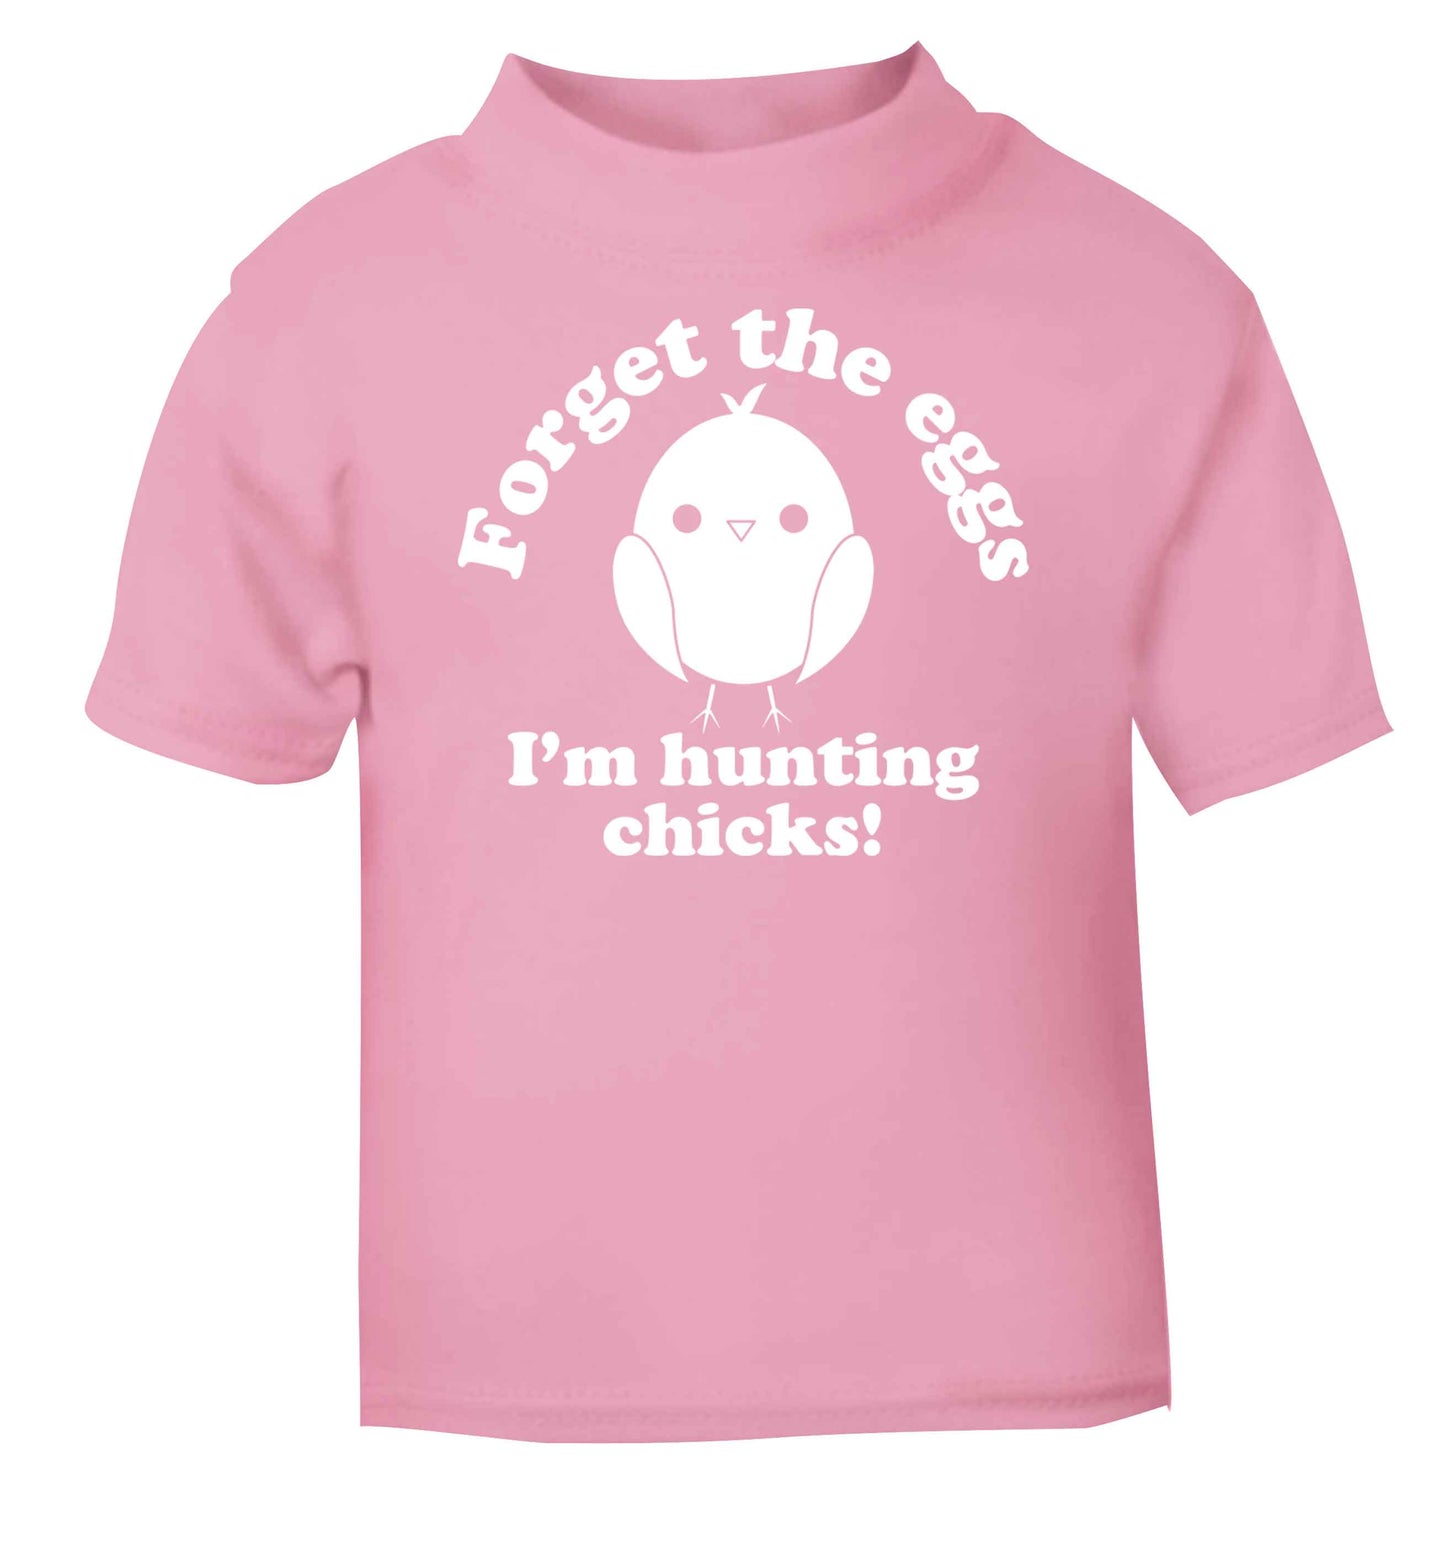 Forget the eggs I'm hunting chicks! light pink baby toddler Tshirt 2 Years